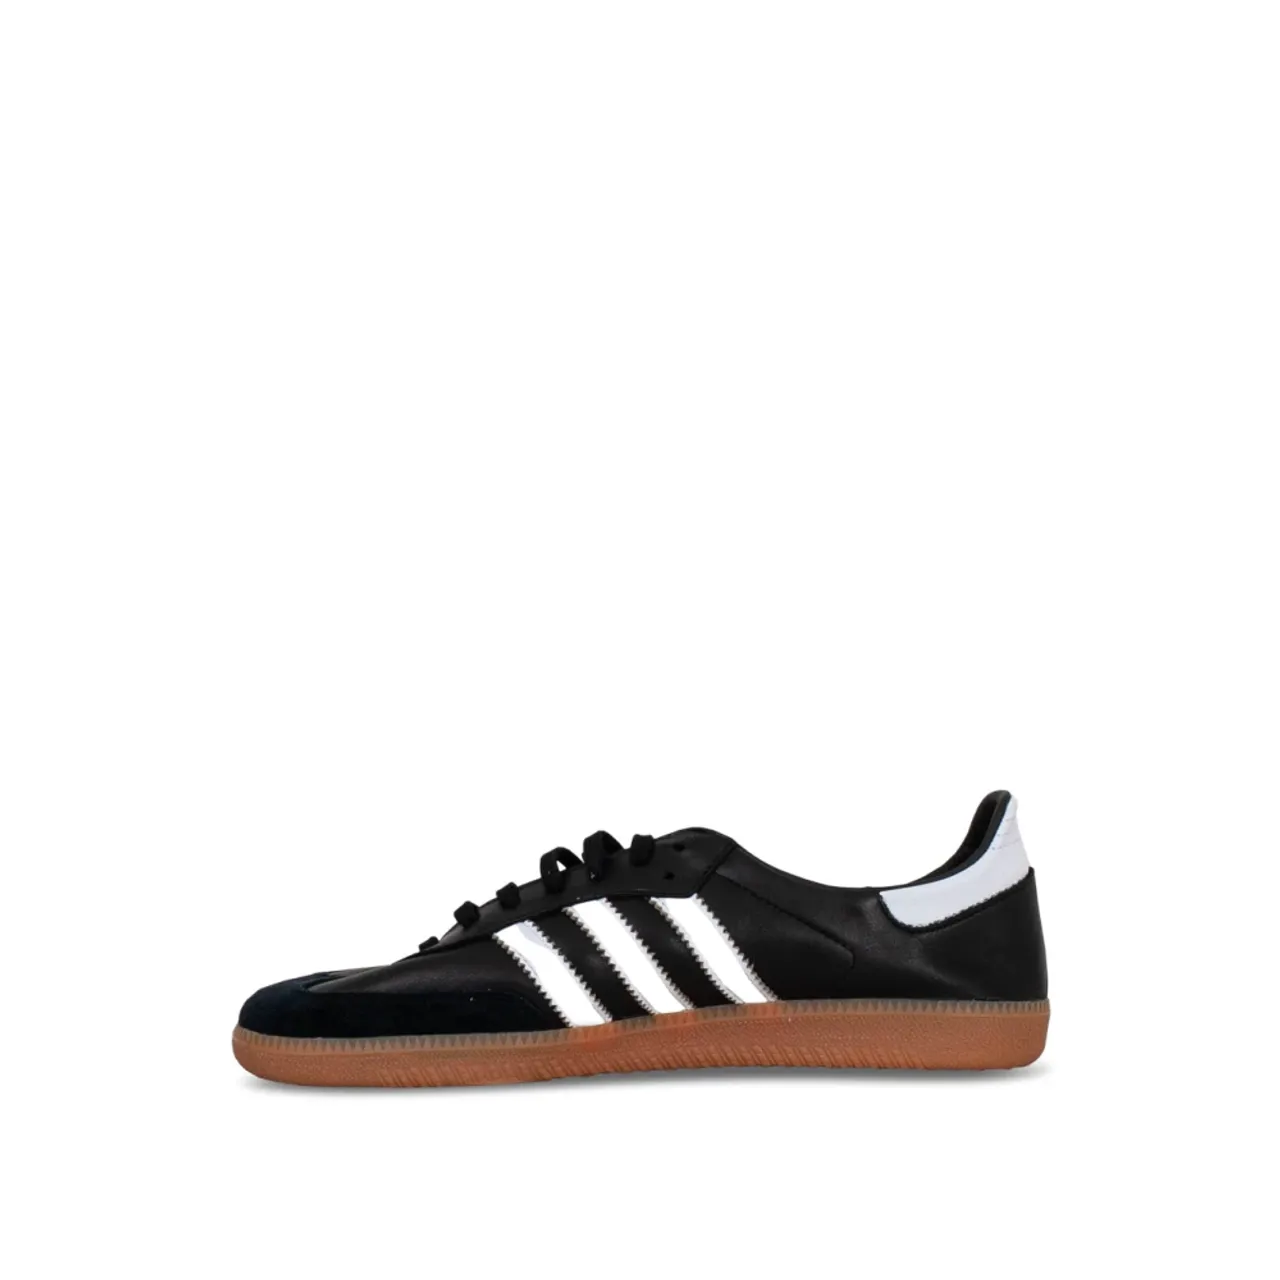 Adidas Originals , Black Sneakers with Leather Upper and Gum Sole ,Black male, Sizes: